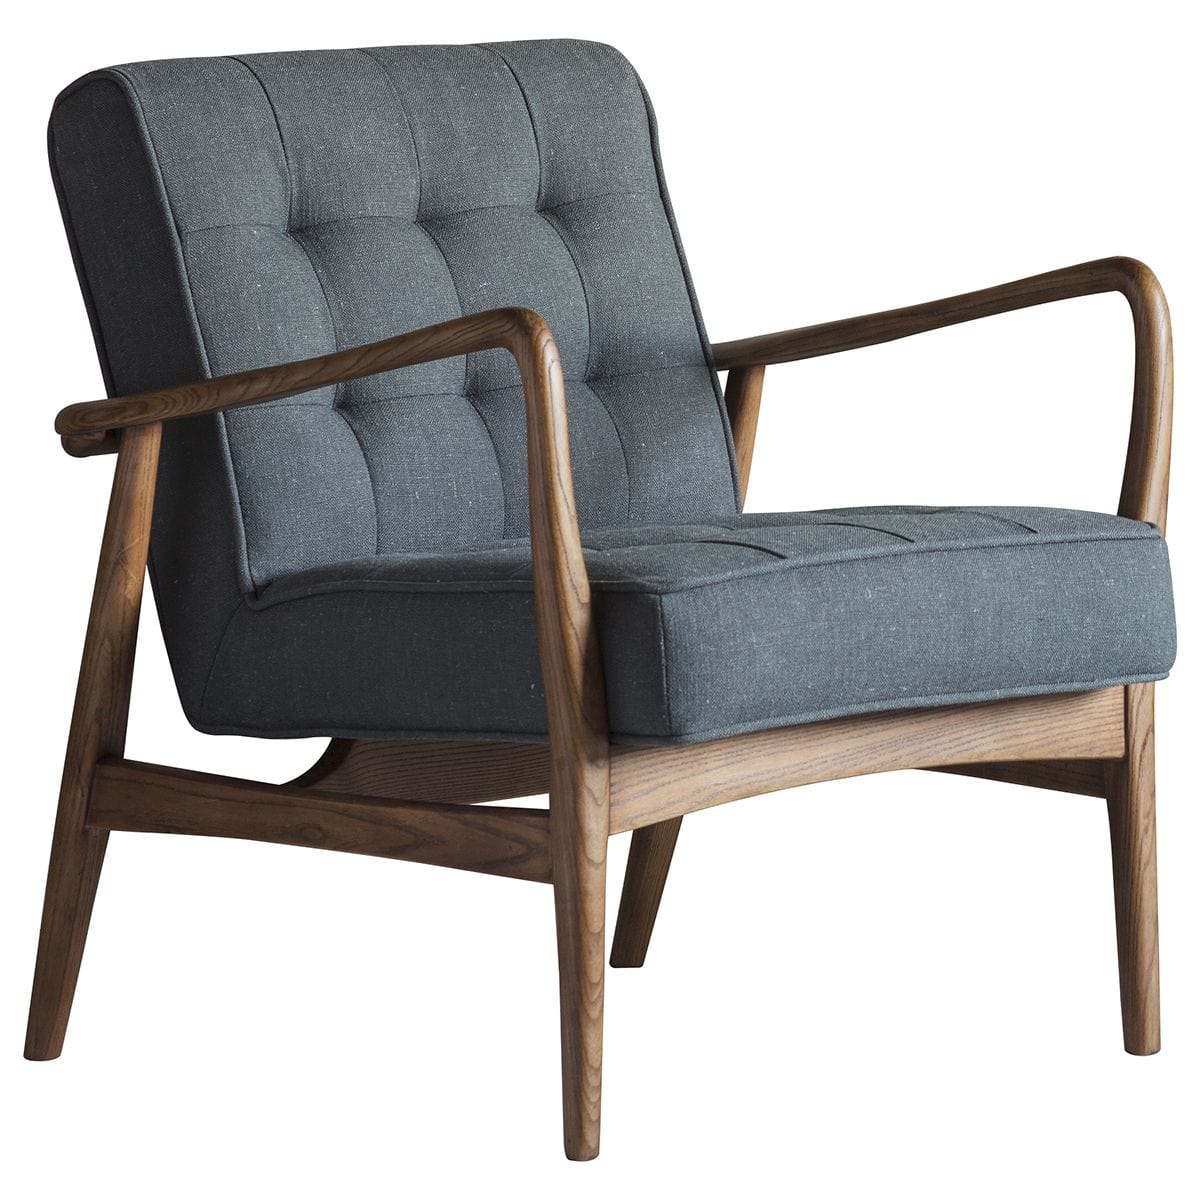 Humber Armchair - Colour/Material Options